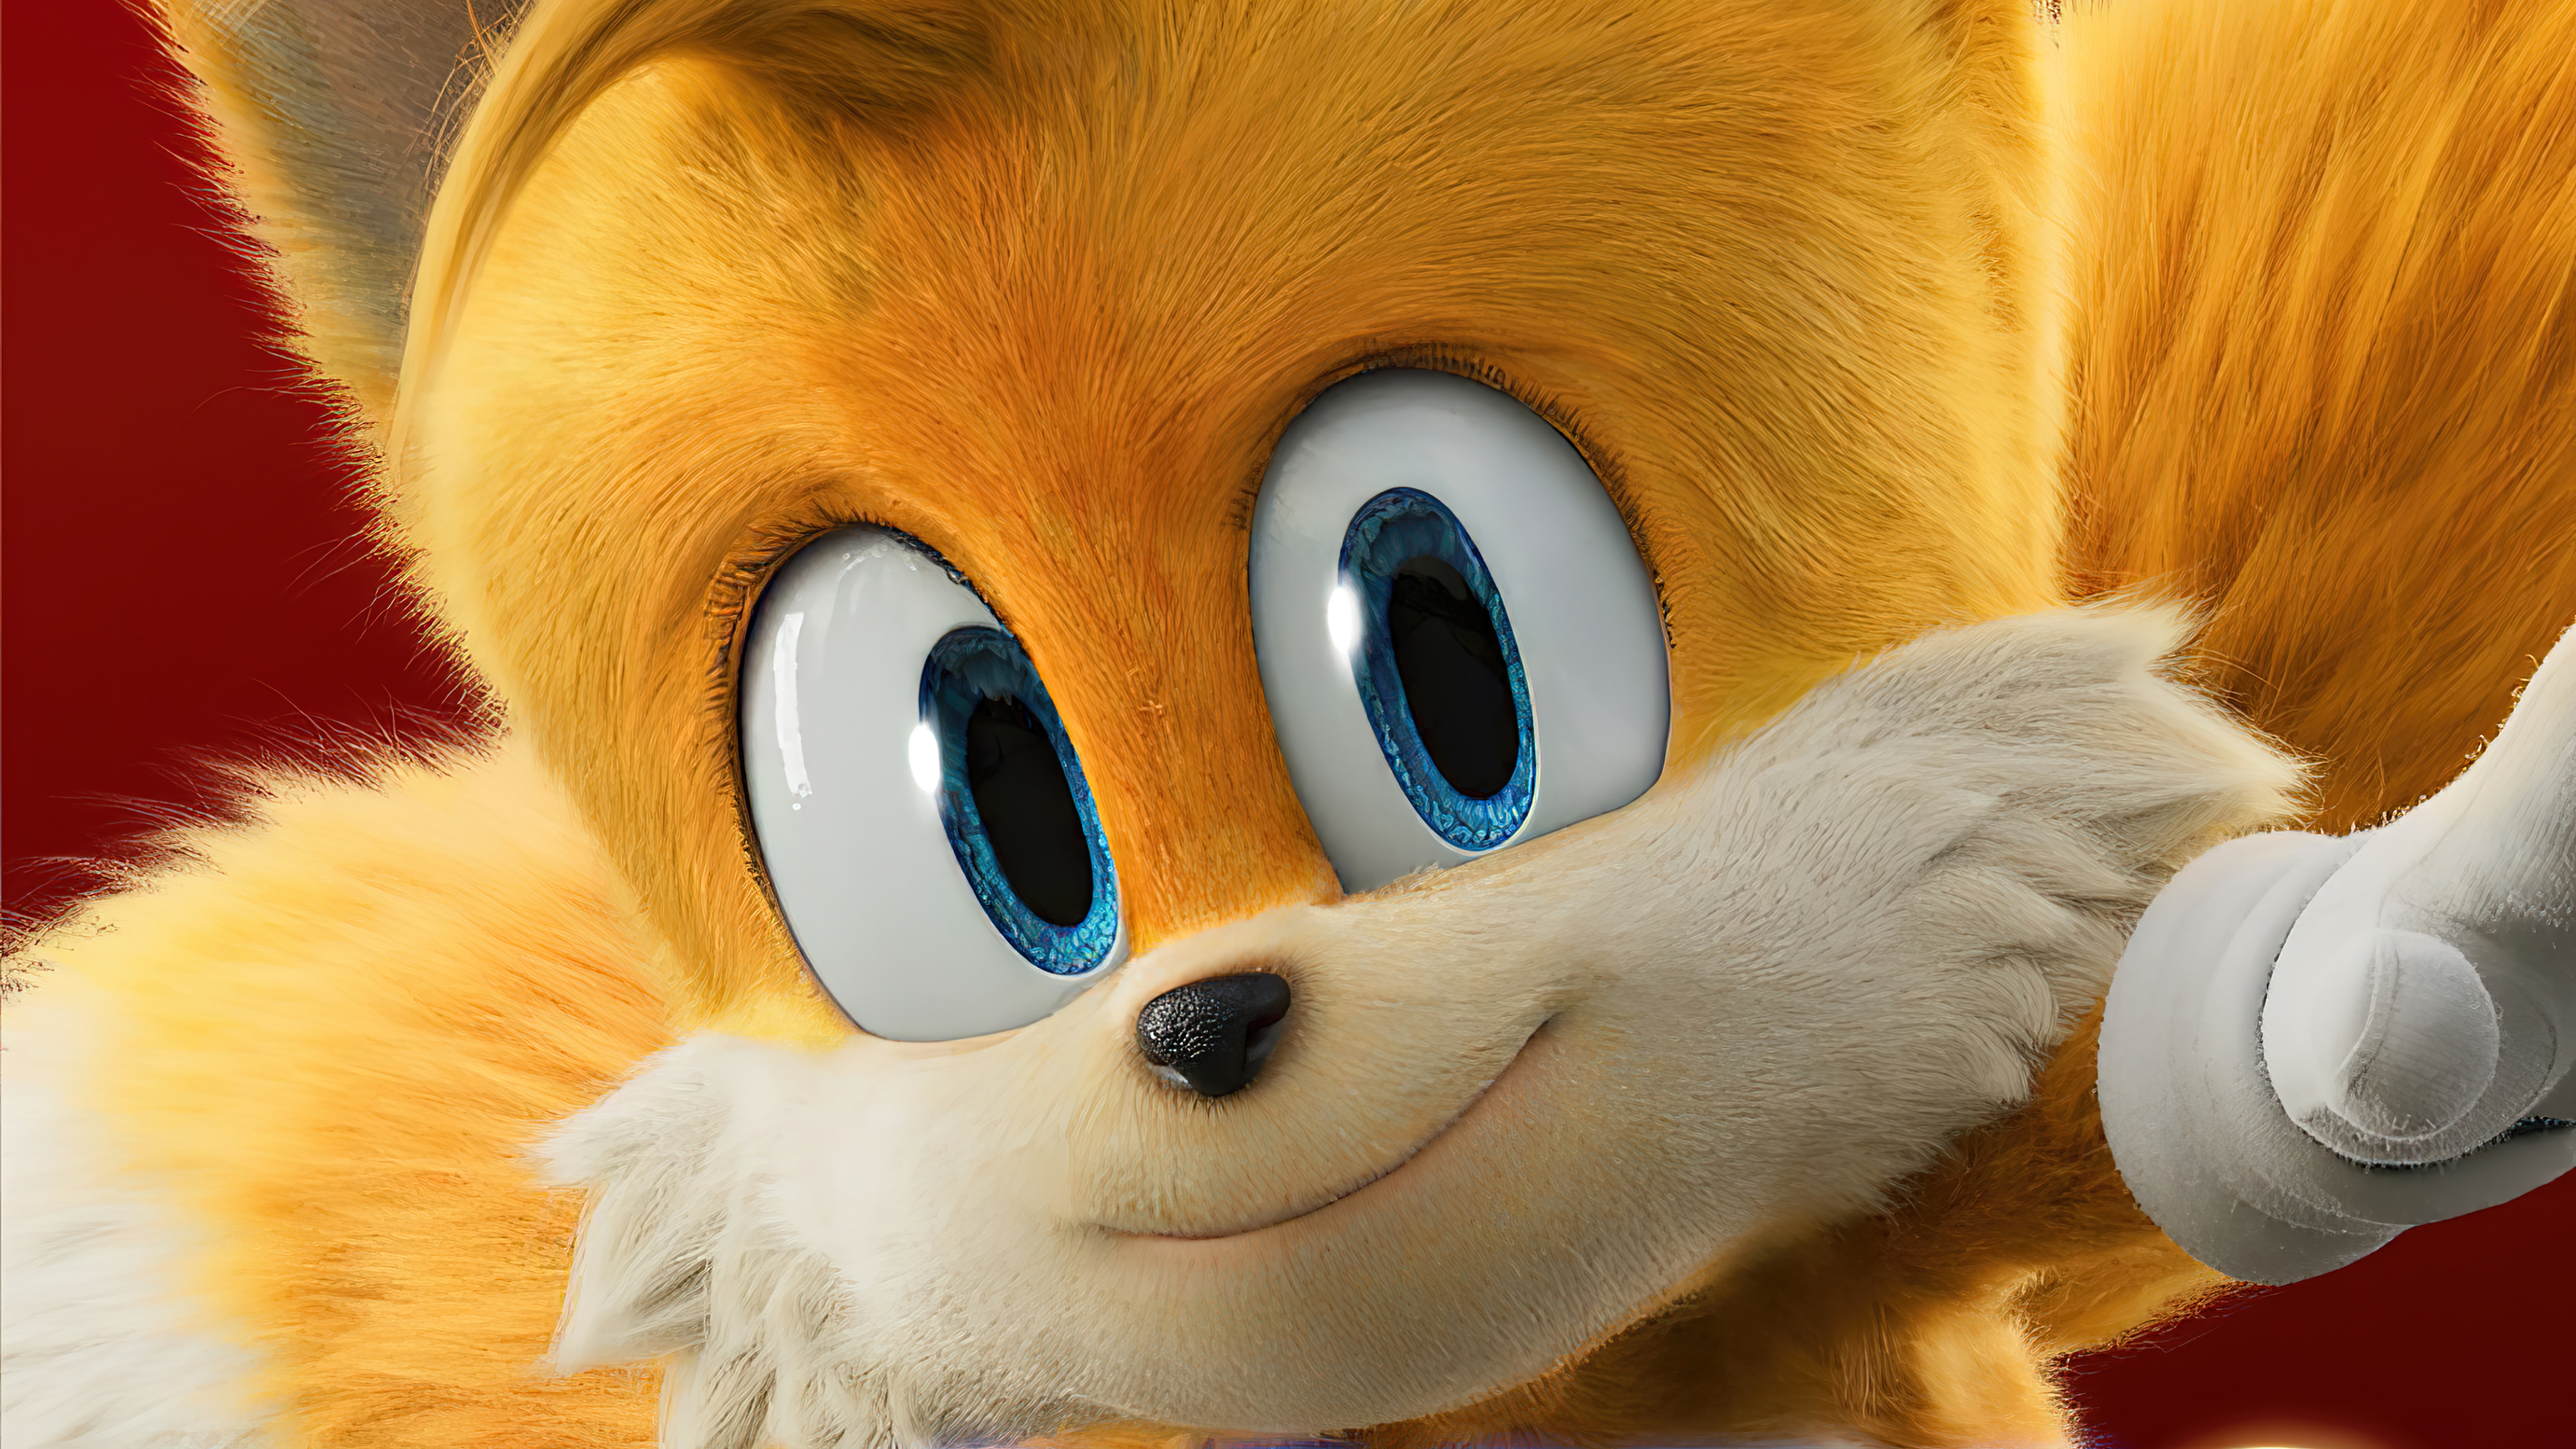 Super Tails HD Wallpapers and Backgrounds